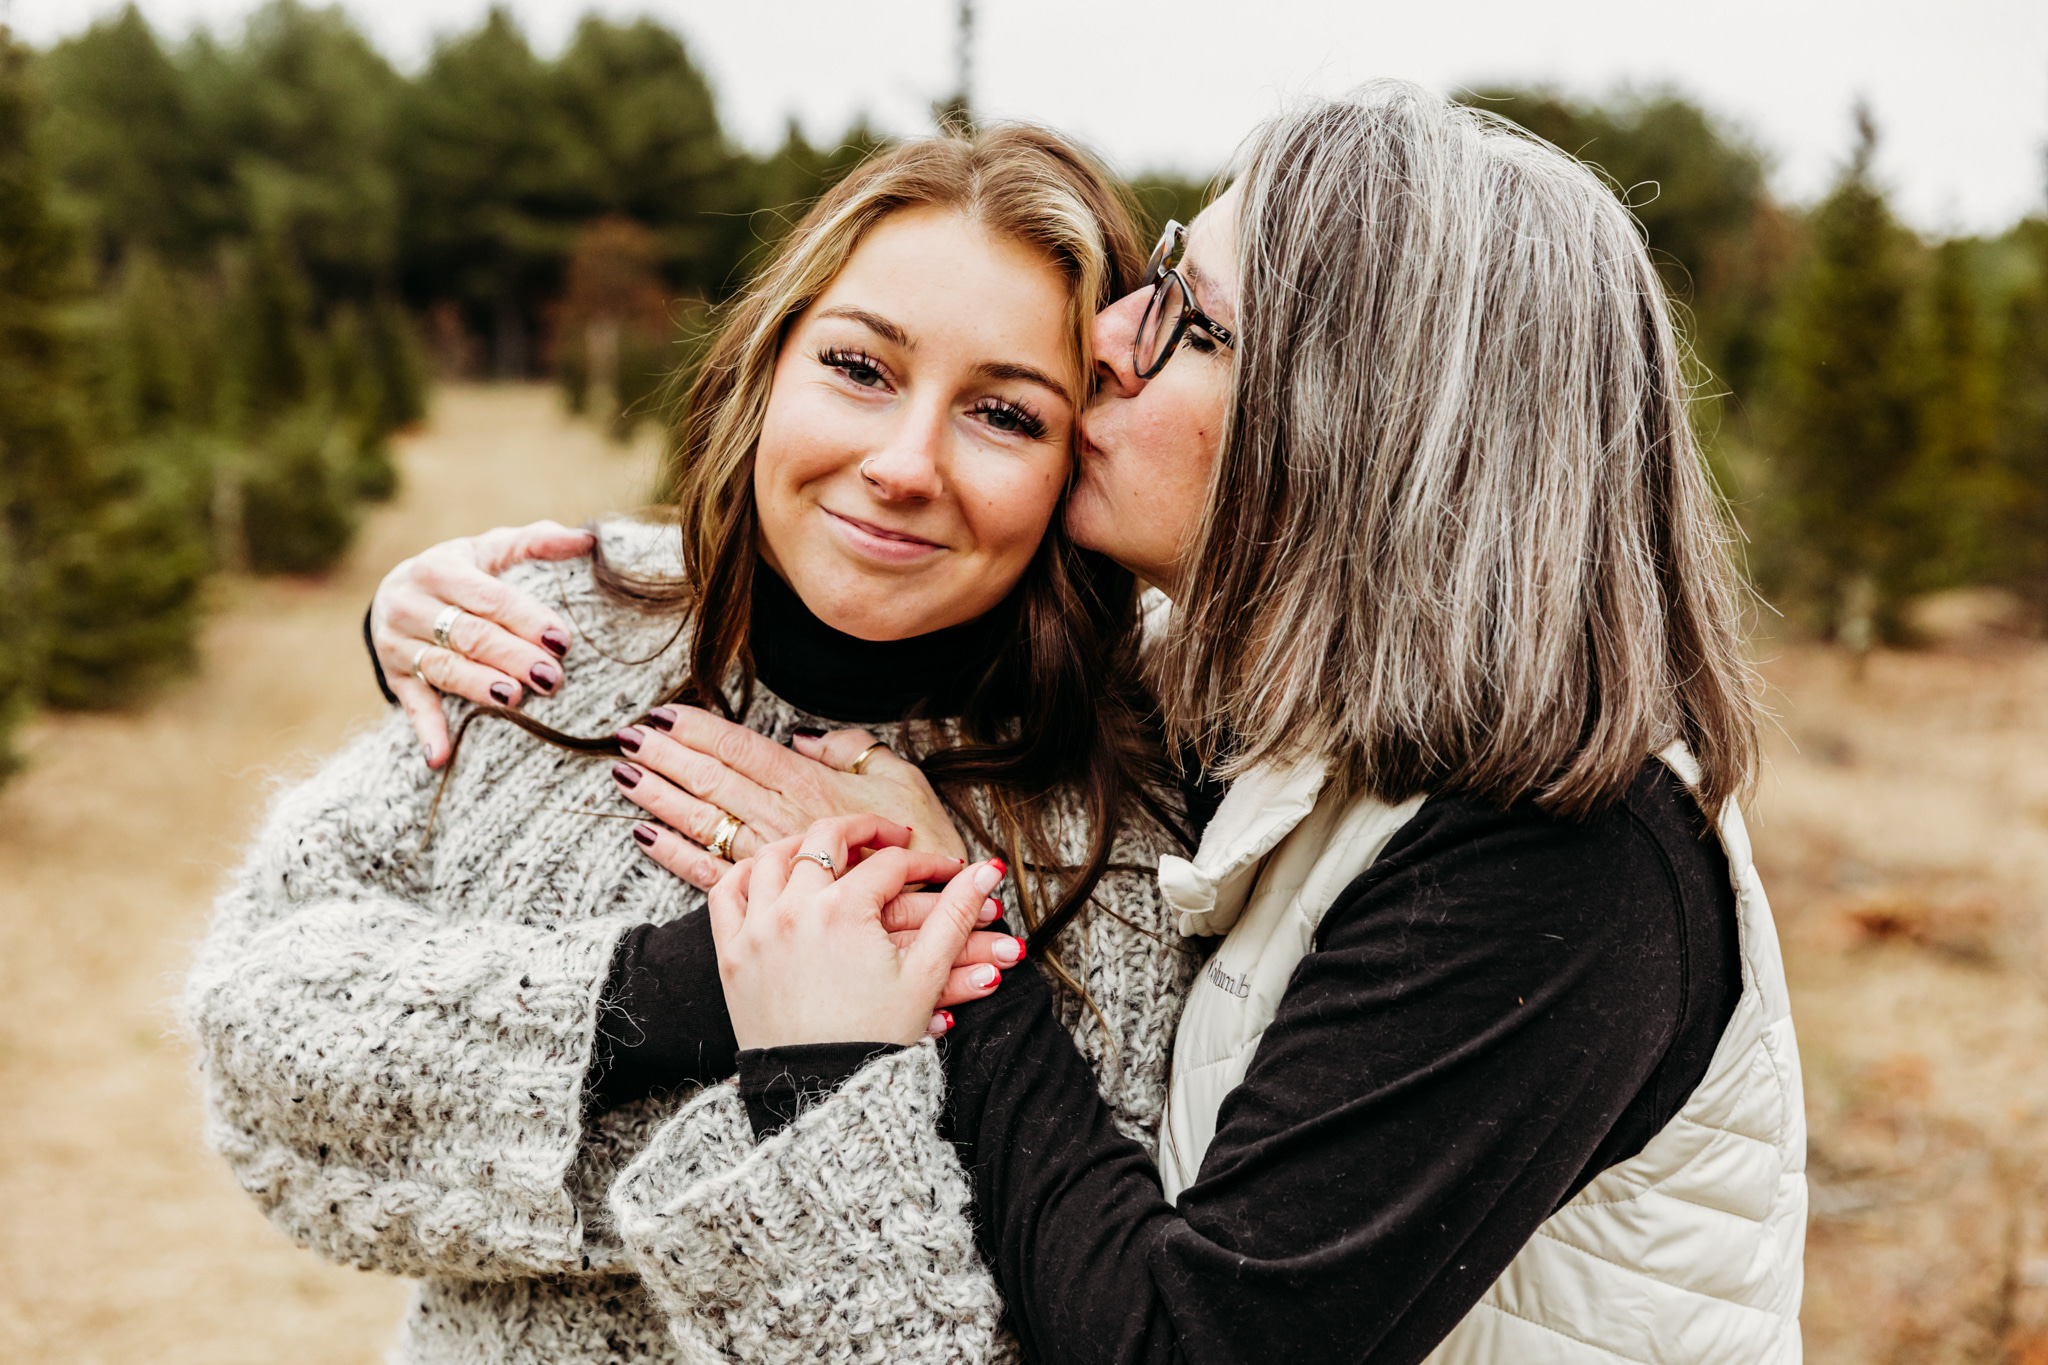 mom kissing her daughter on the cheek in a field